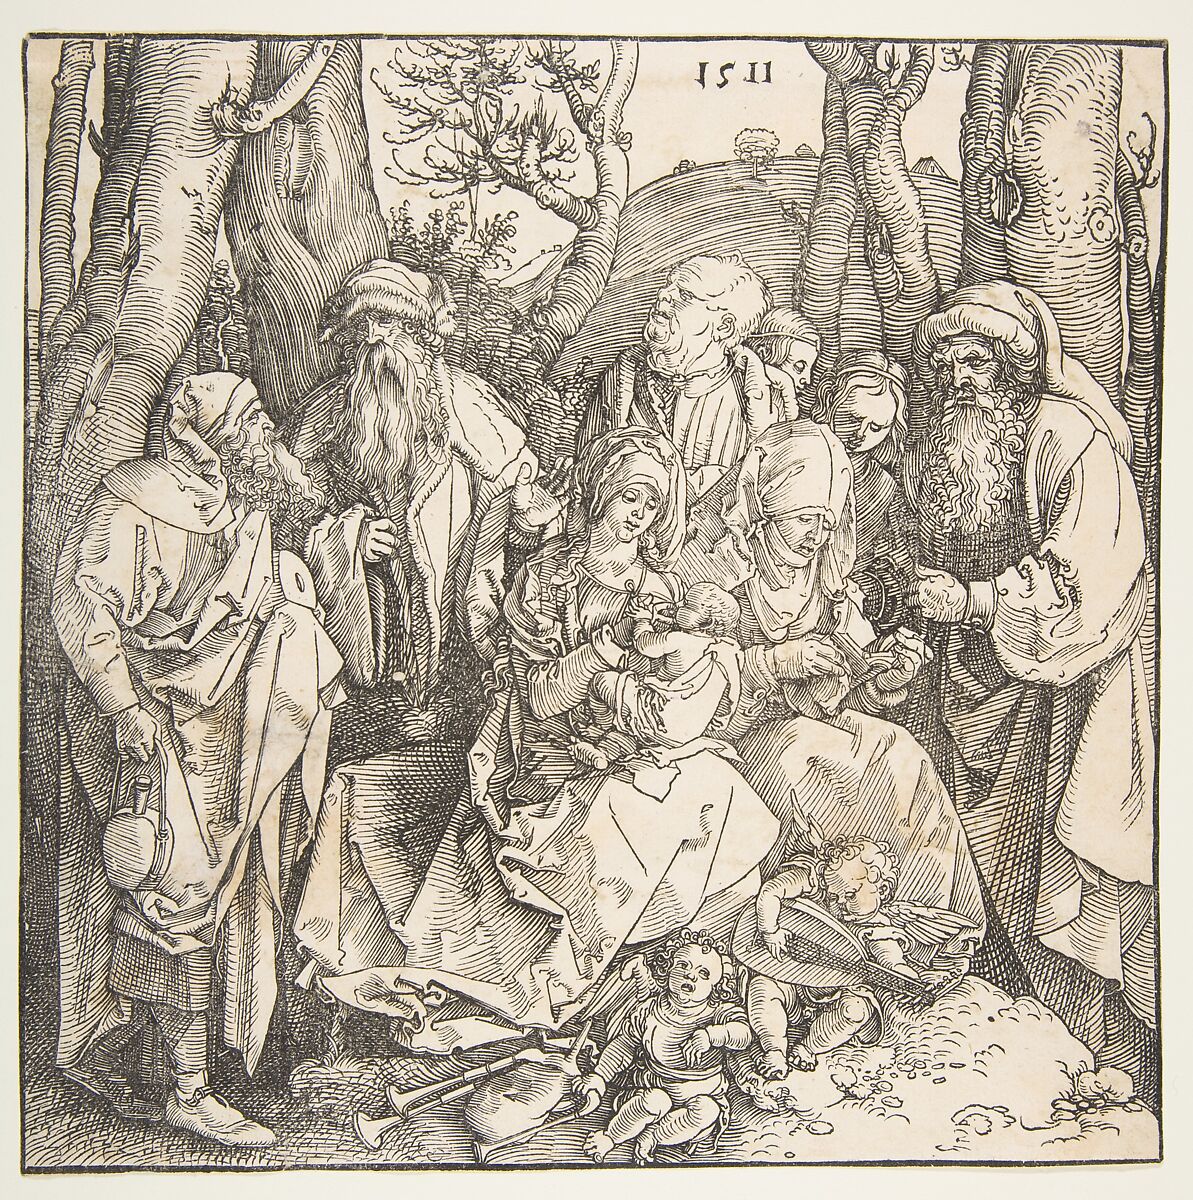 The Holy Family with Saints and Two Musical Angels, Albrecht Dürer (German, Nuremberg 1471–1528 Nuremberg), Woodcut 